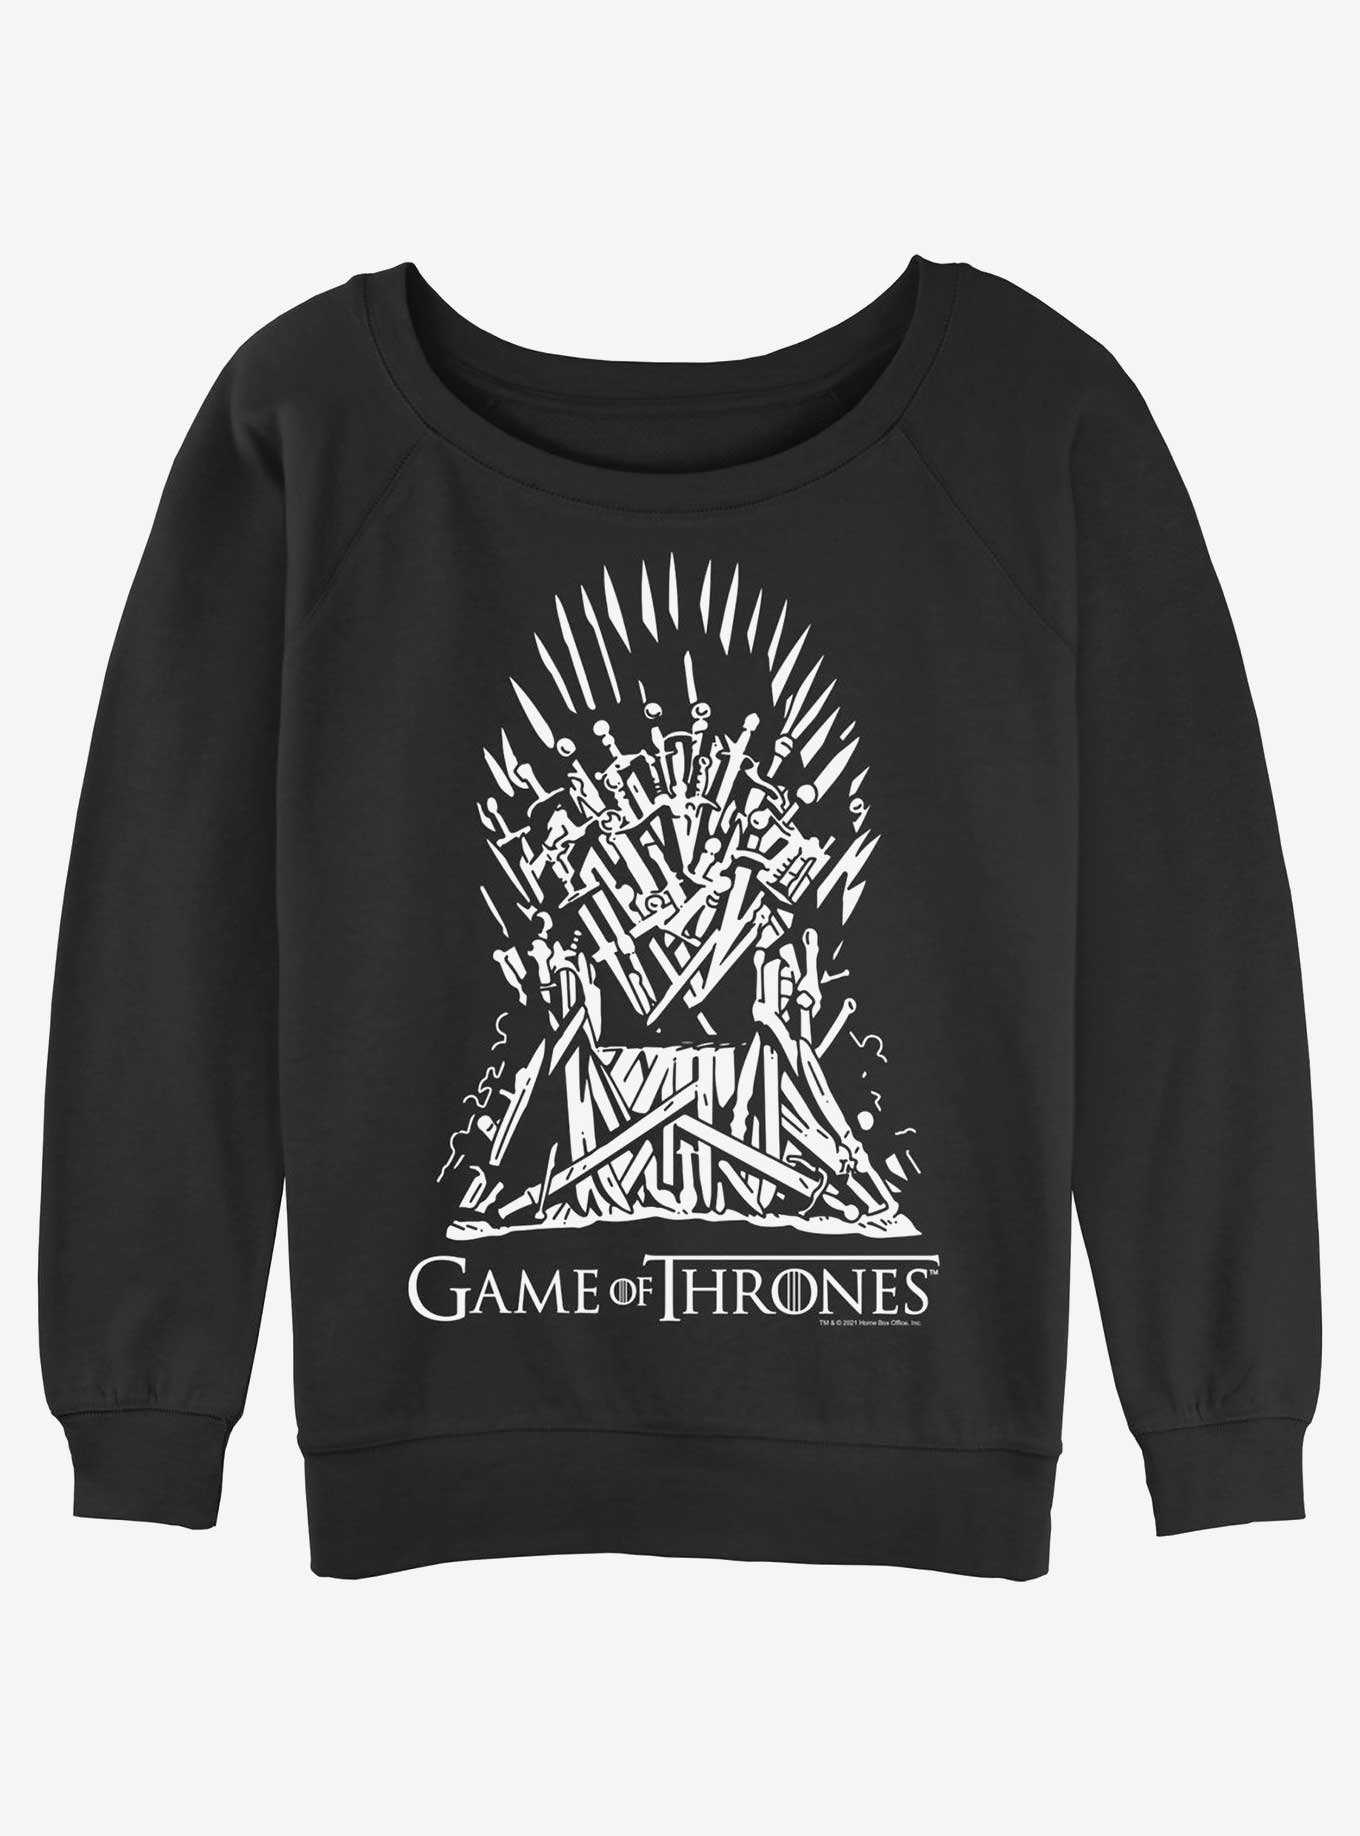 OFFICIAL Game Of Thrones T-Shirts Merchandise Hot Topic | 